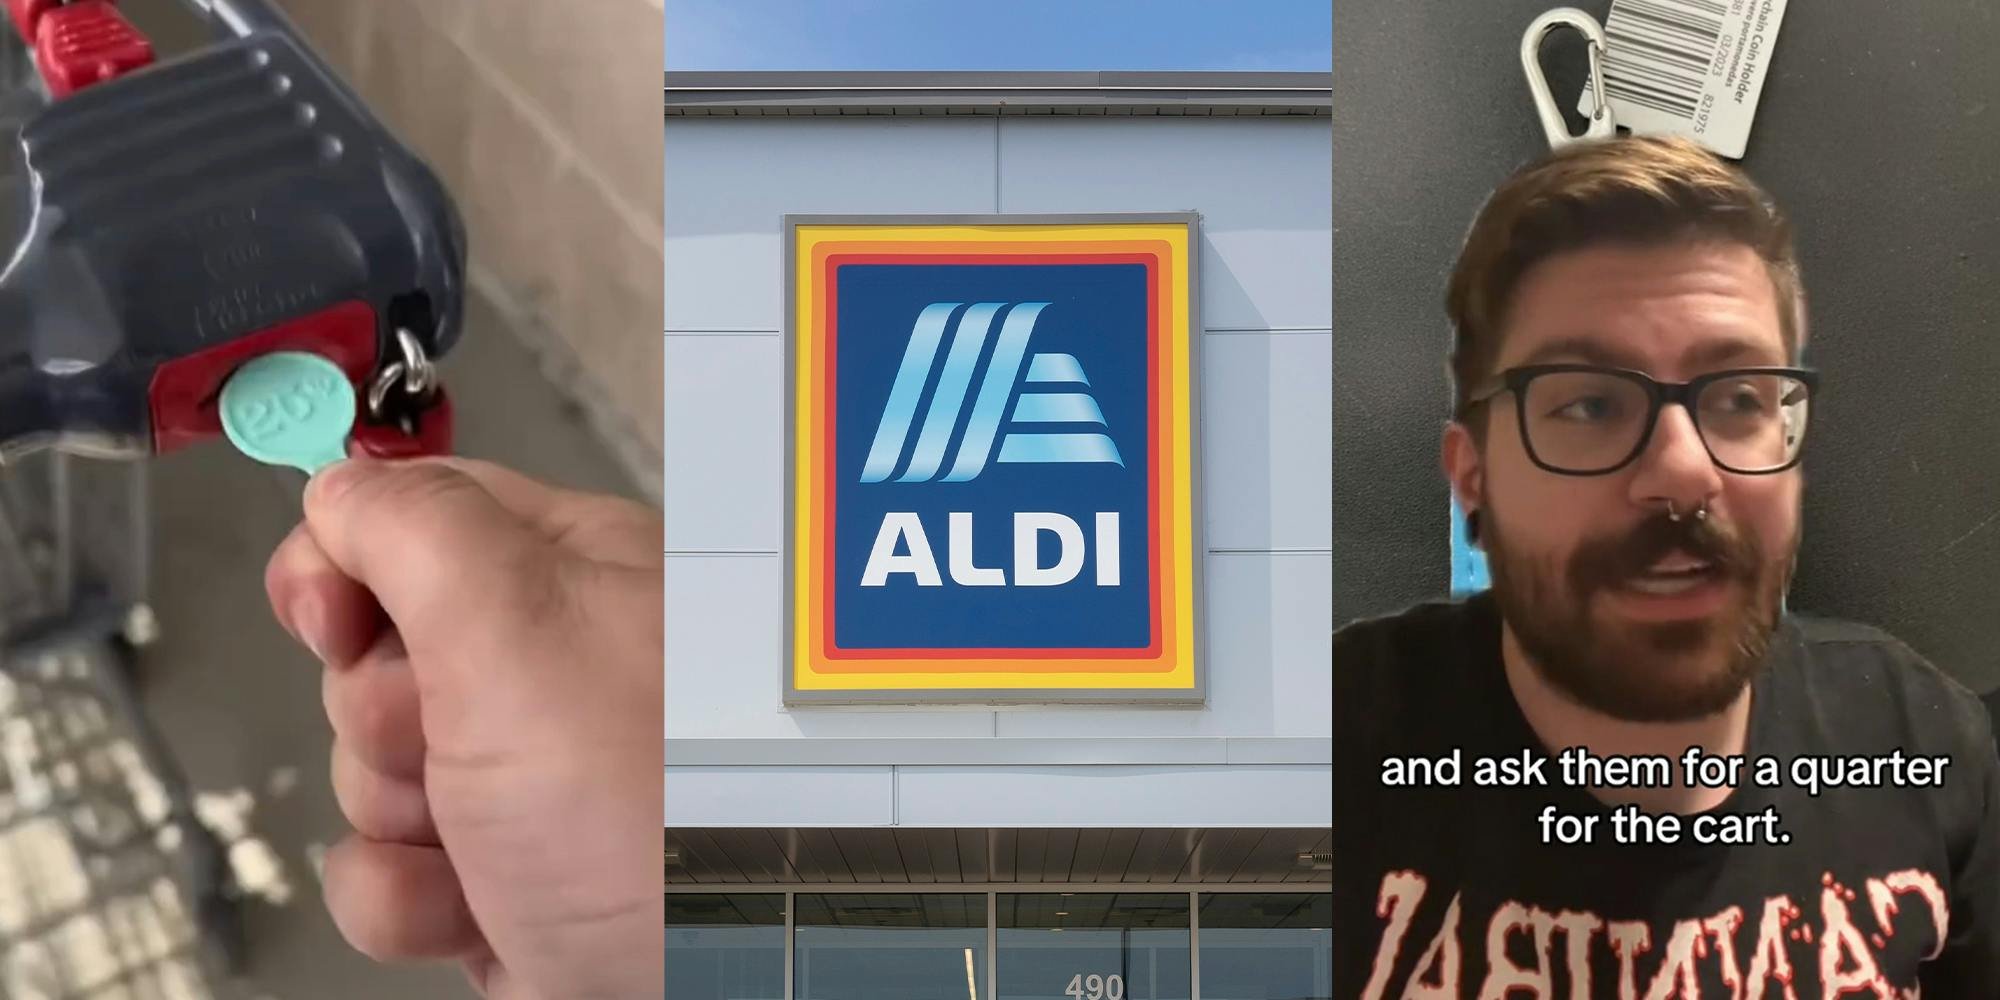 'Please never use these': Ex-Aldi worker warns against using shopping cart hack, says to ask for quarter instead